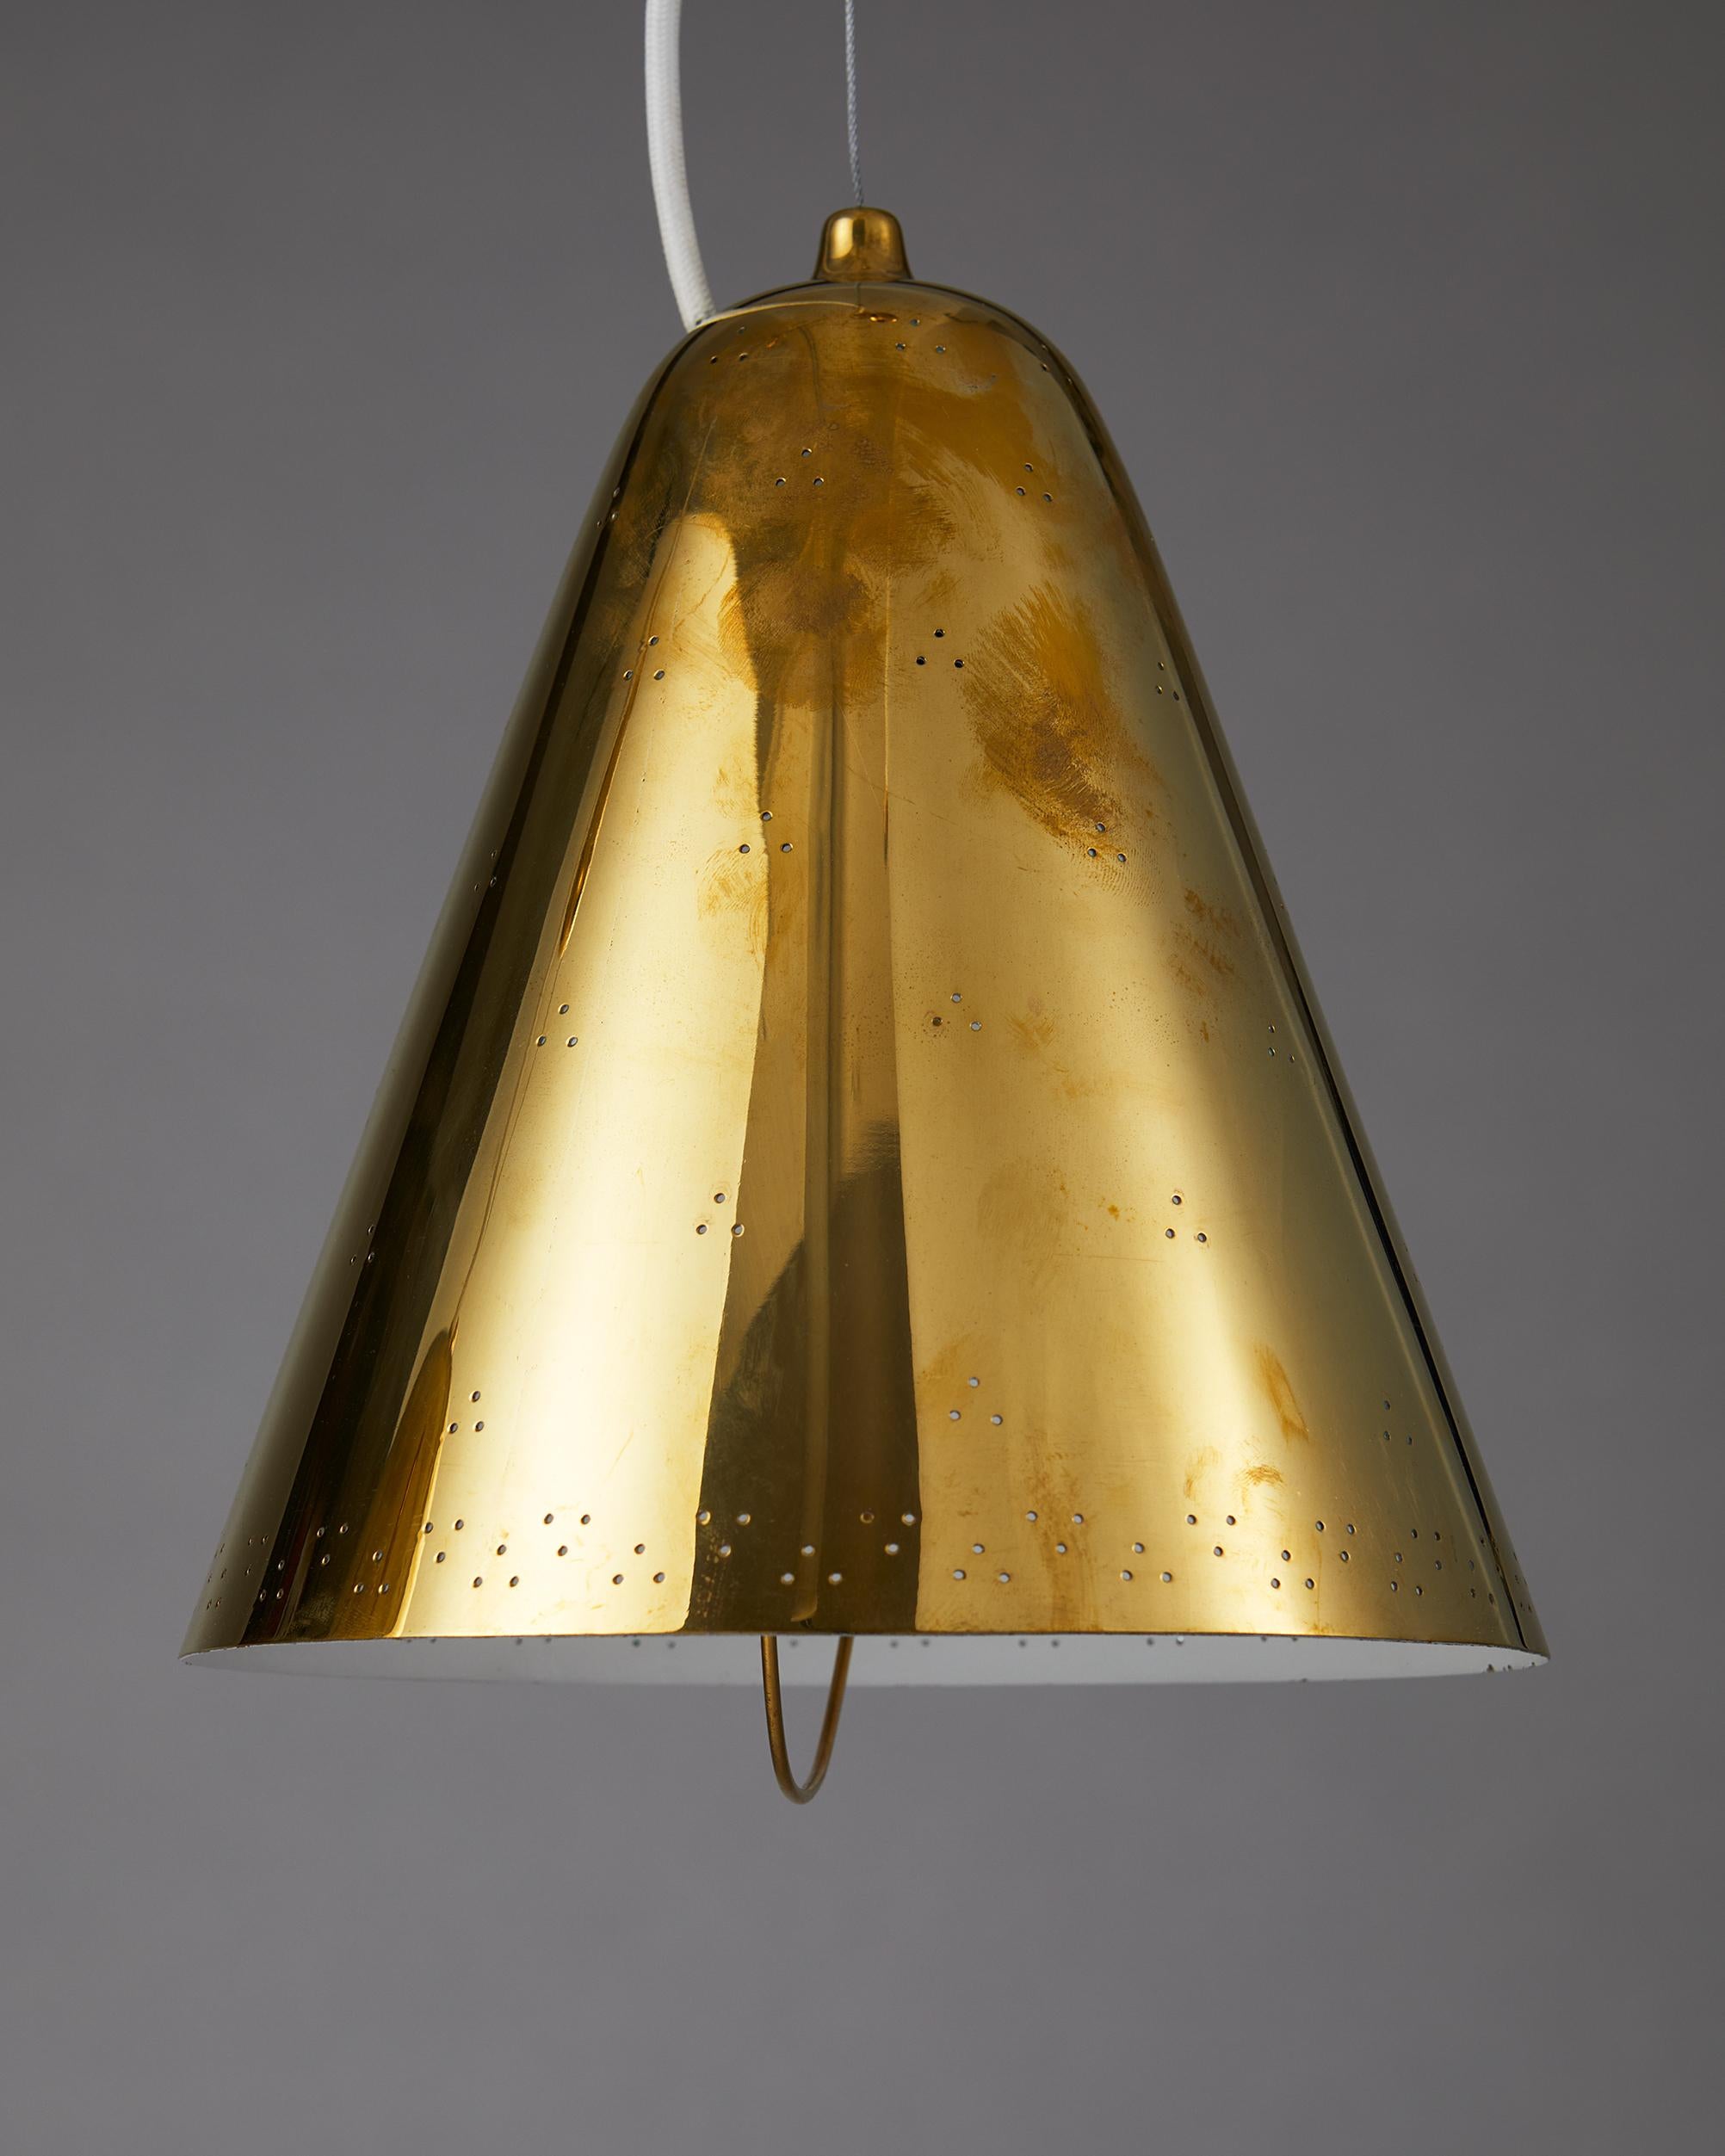 Finnish Pair of Ceiling Lamps Designed by Paavo Tynell for Taito Oy, Finland, 1940